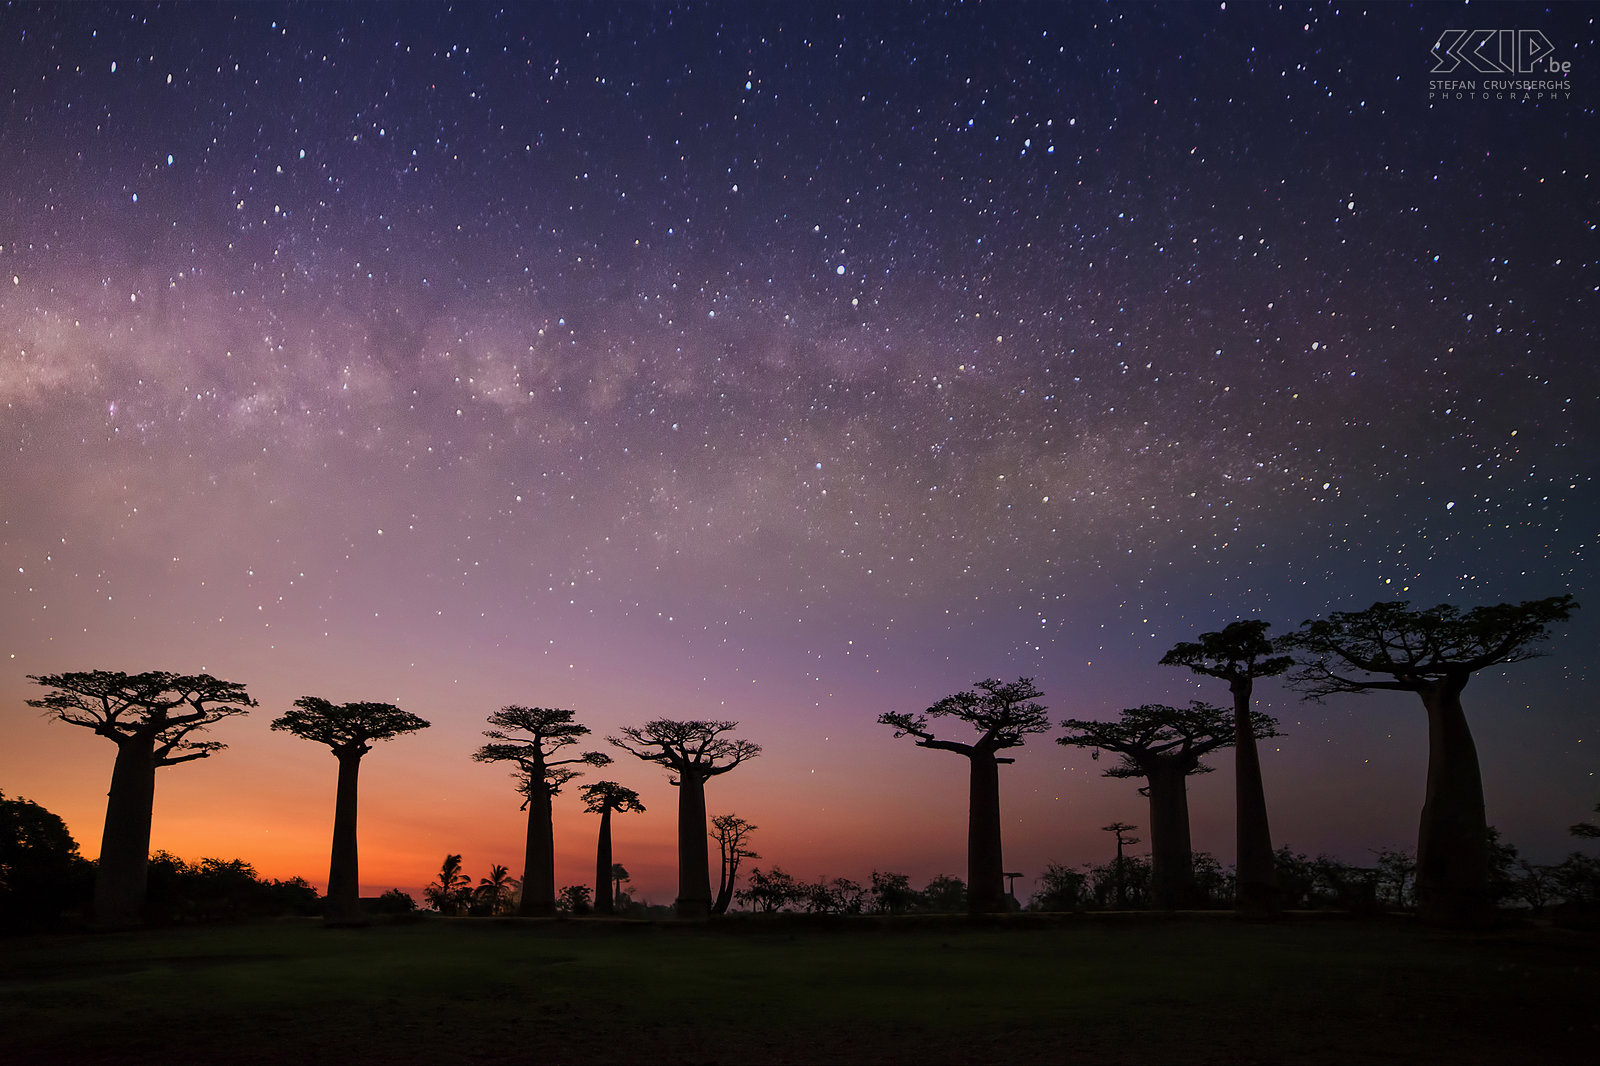 Milky Way at the baobabs The ‘Avenue of Baobabs’ has been portrayed by countless photographers, especially at sunset. I stayed after sunset and I made this photo when there were still shades of orange, pink and purple at the horizon and it was already dark enough to see the Milky Way clearly. Stefan Cruysberghs